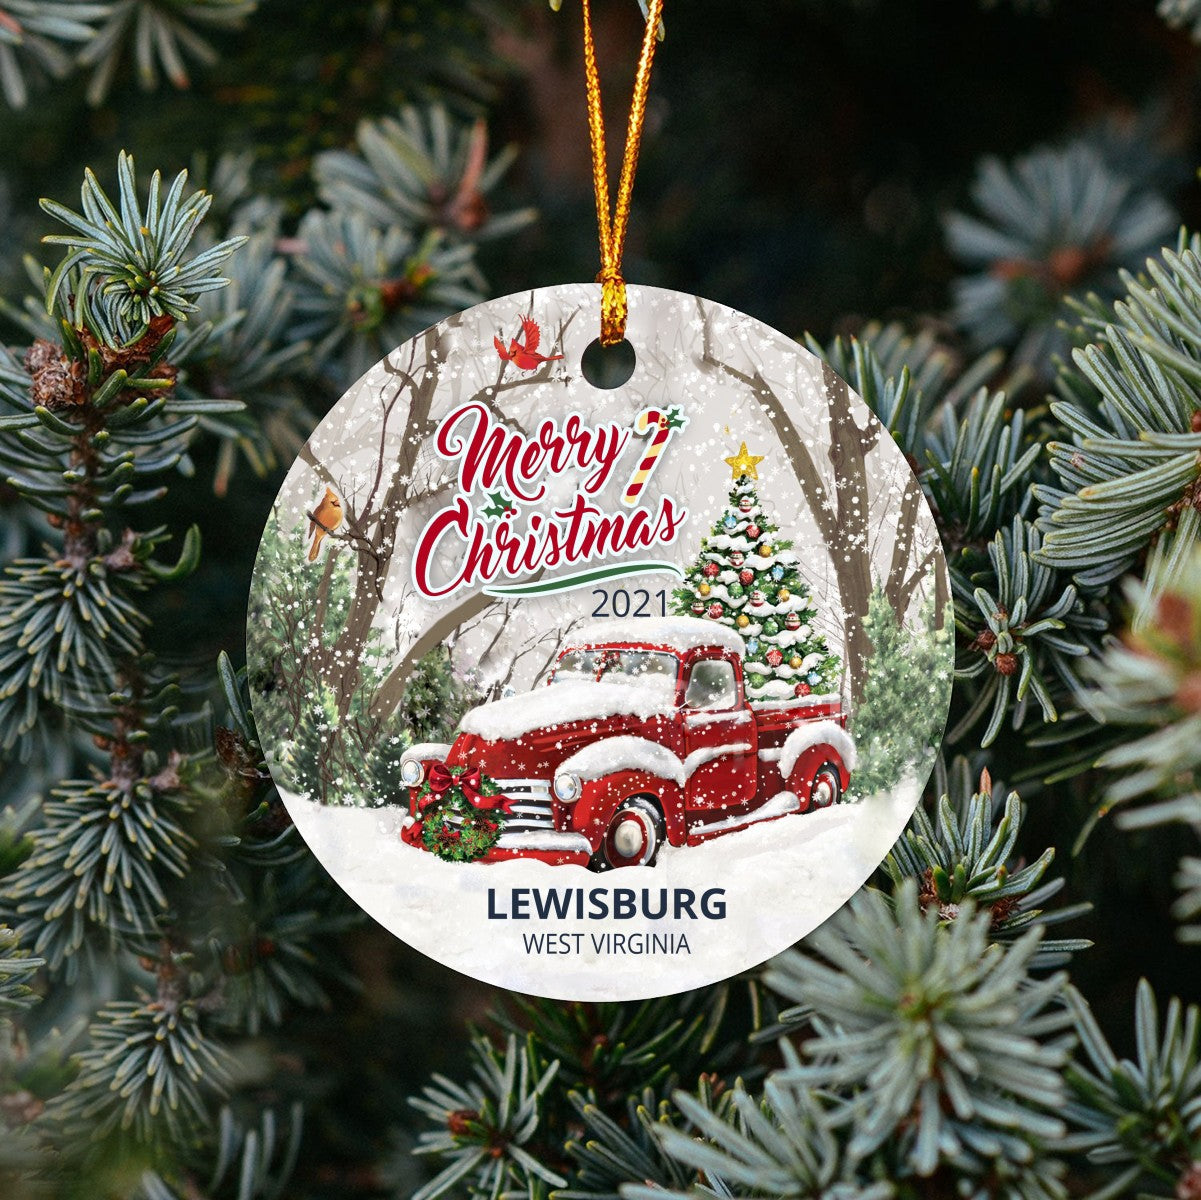 Christmas Tree Ornaments Lewisburg - Ornament With Name City, State Lewisburg West Virginia WV Ornament - Red Truck Xmas Ornaments 3'' Plastic Gift For Family, Friend And Housewarming